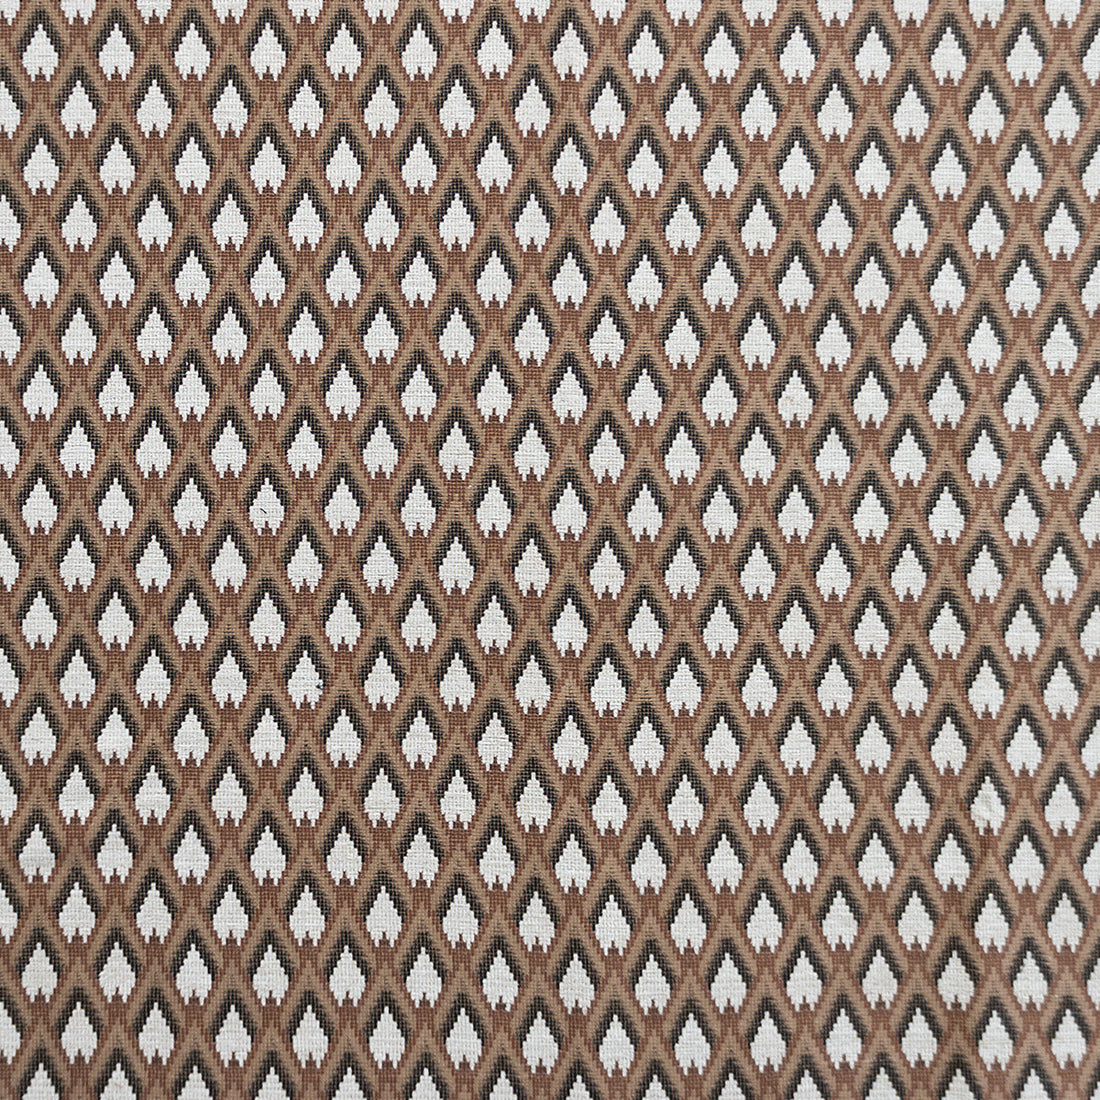 Peruyes fabric in chocolate color - pattern LCT1078.004.0 - by Gaston y Daniela in the Lorenzo Castillo VII The Rectory collection